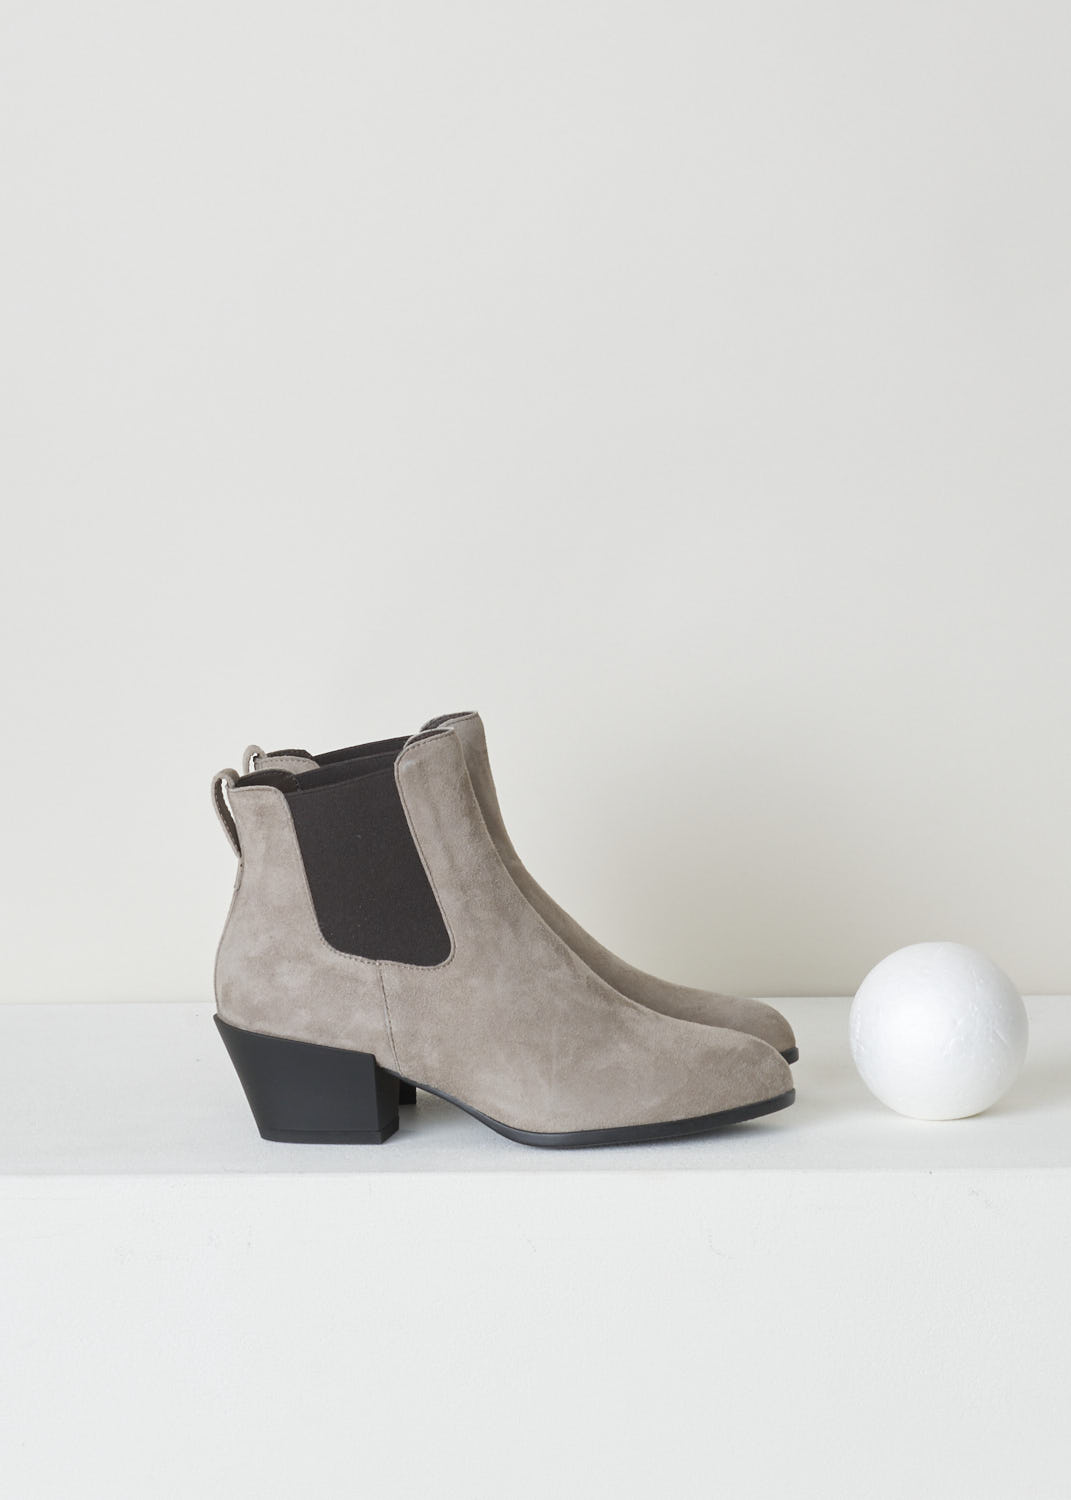 HOGAN, BEIGE SUEDE CHELSEA BOOTS, HXW4010W890CR0C407, Beige, Grey, Side, Beige suede Chelsea boots featuring a contrasting black elastic side panel and a pull tab on the back of the boot. These boots have a small heel and a pointed toe.  

Heel height: 5.5 cm / 2.1 inch
